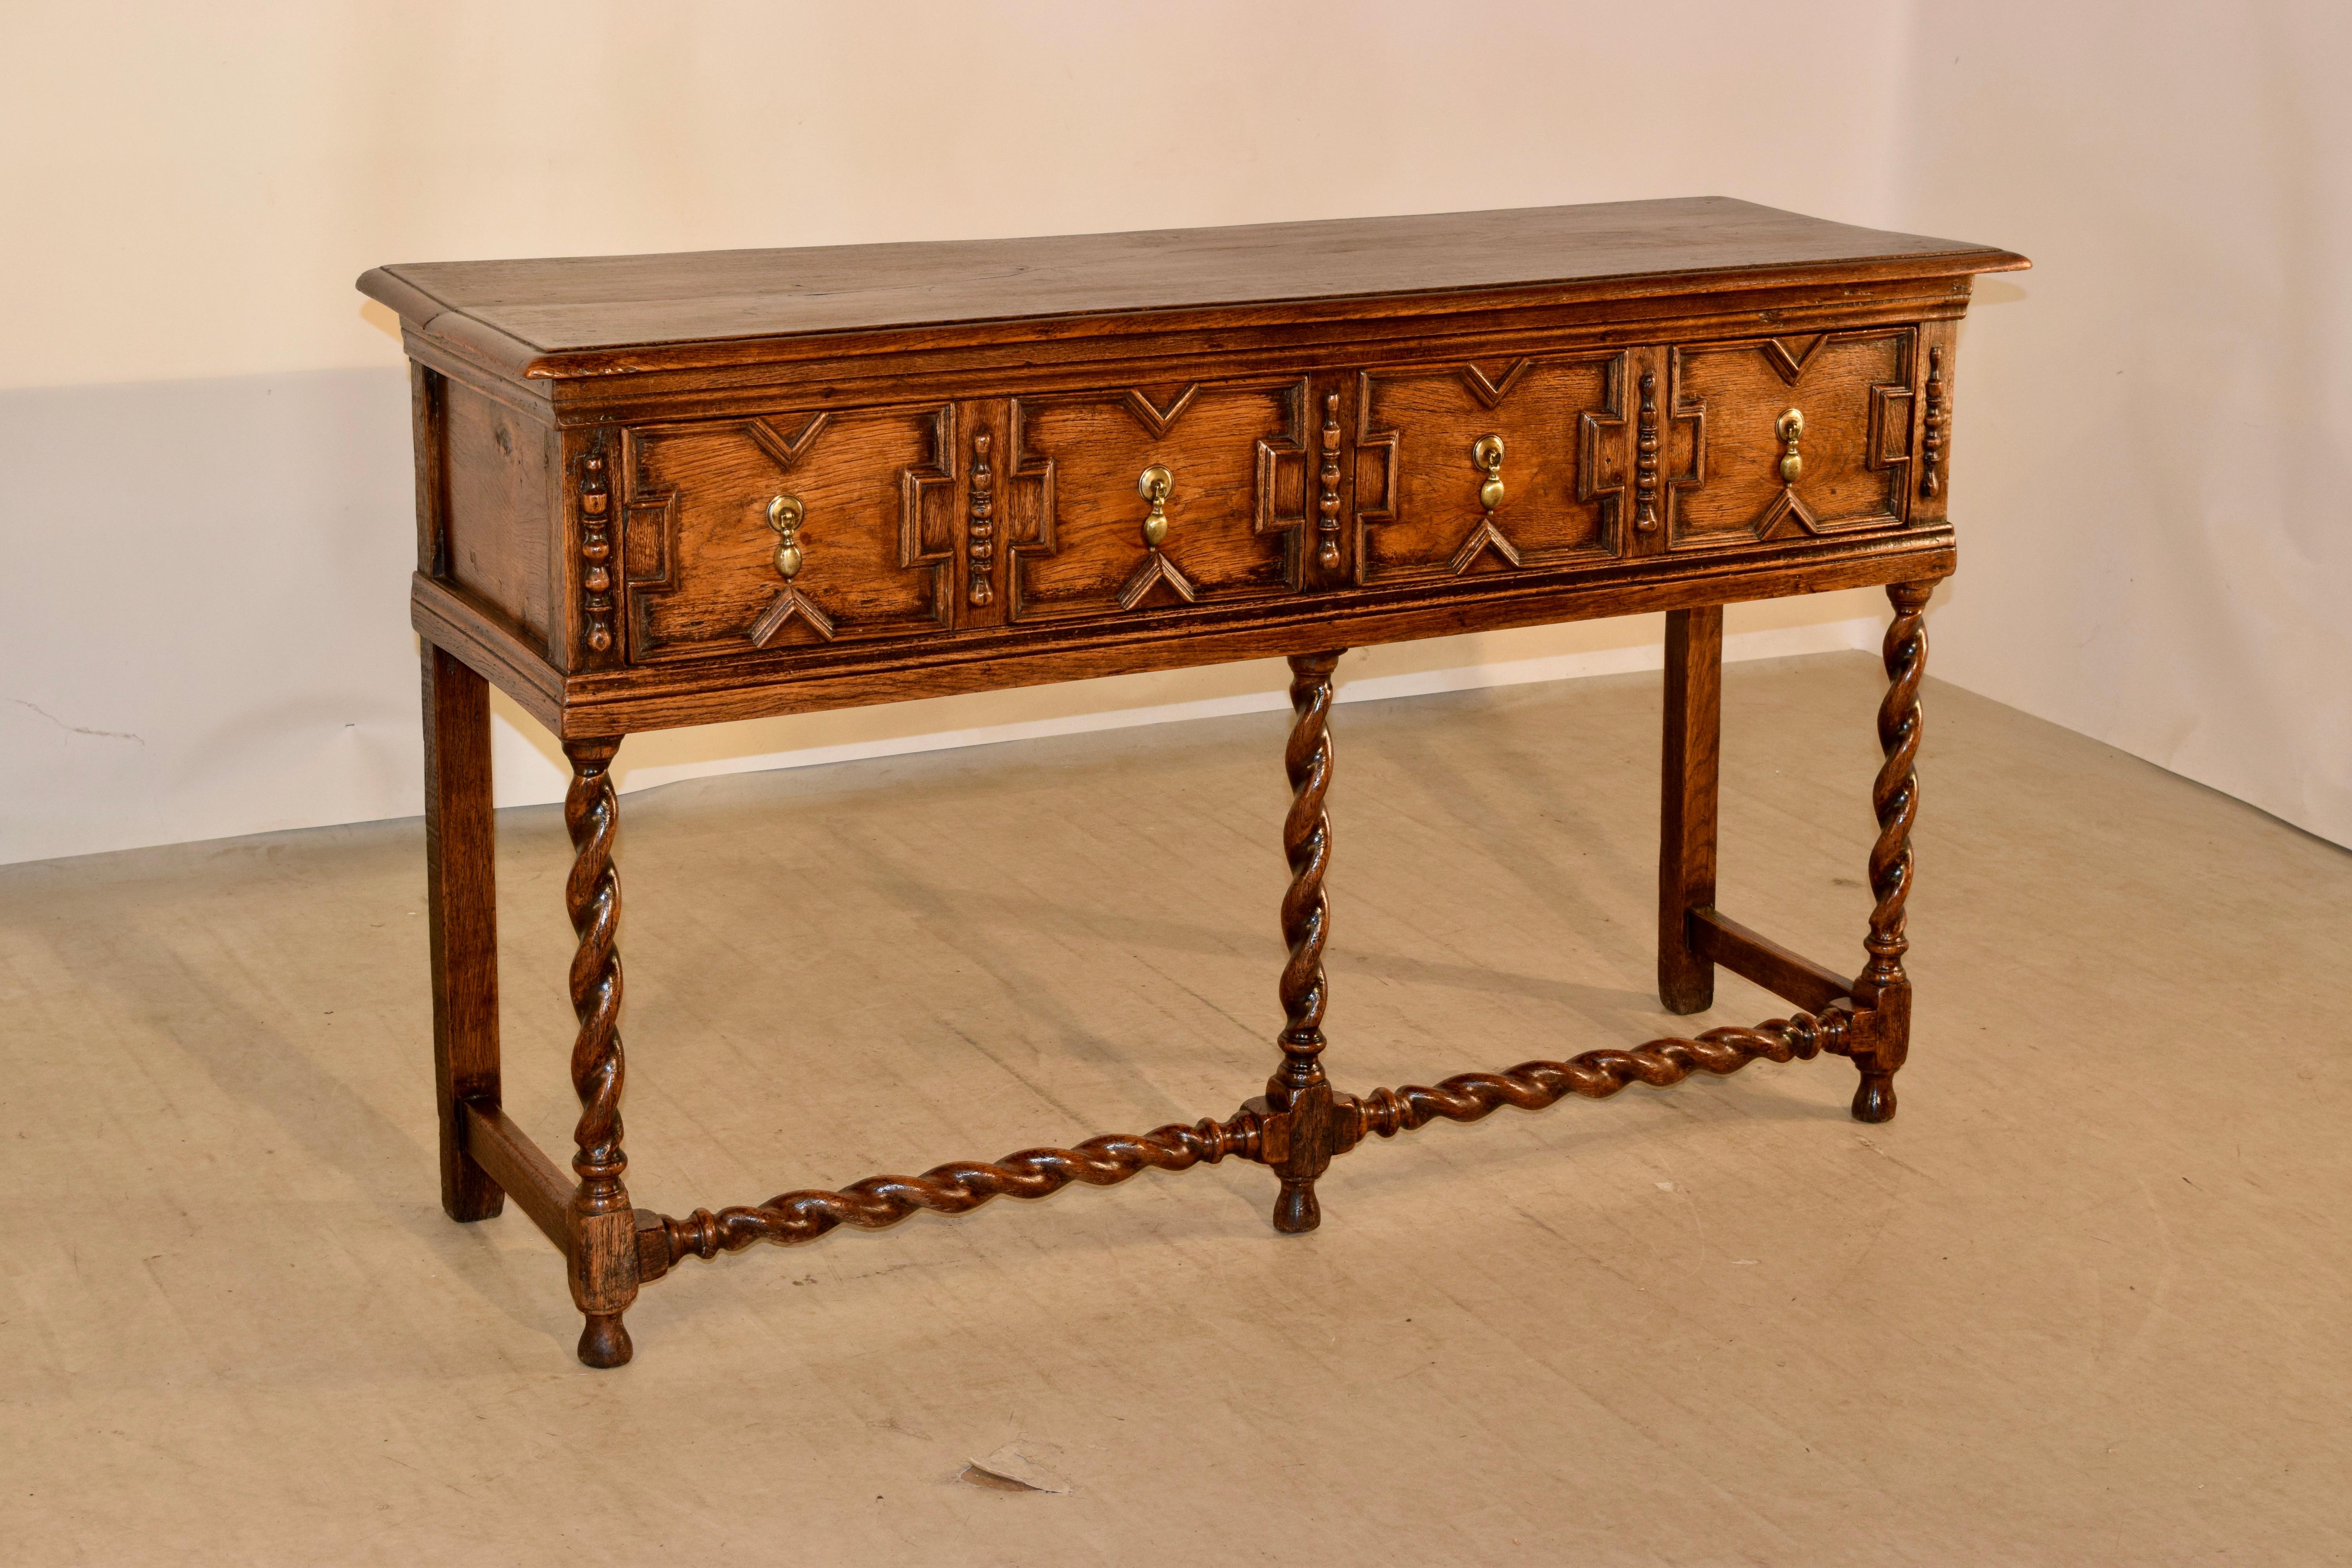 18th century oak sideboard from England with a single plank top, which has a beveled edge, following down to simple paneled sides and two drawers in the front with raised geometric patterned drawer fronts, flanked by applied half turnings. The case